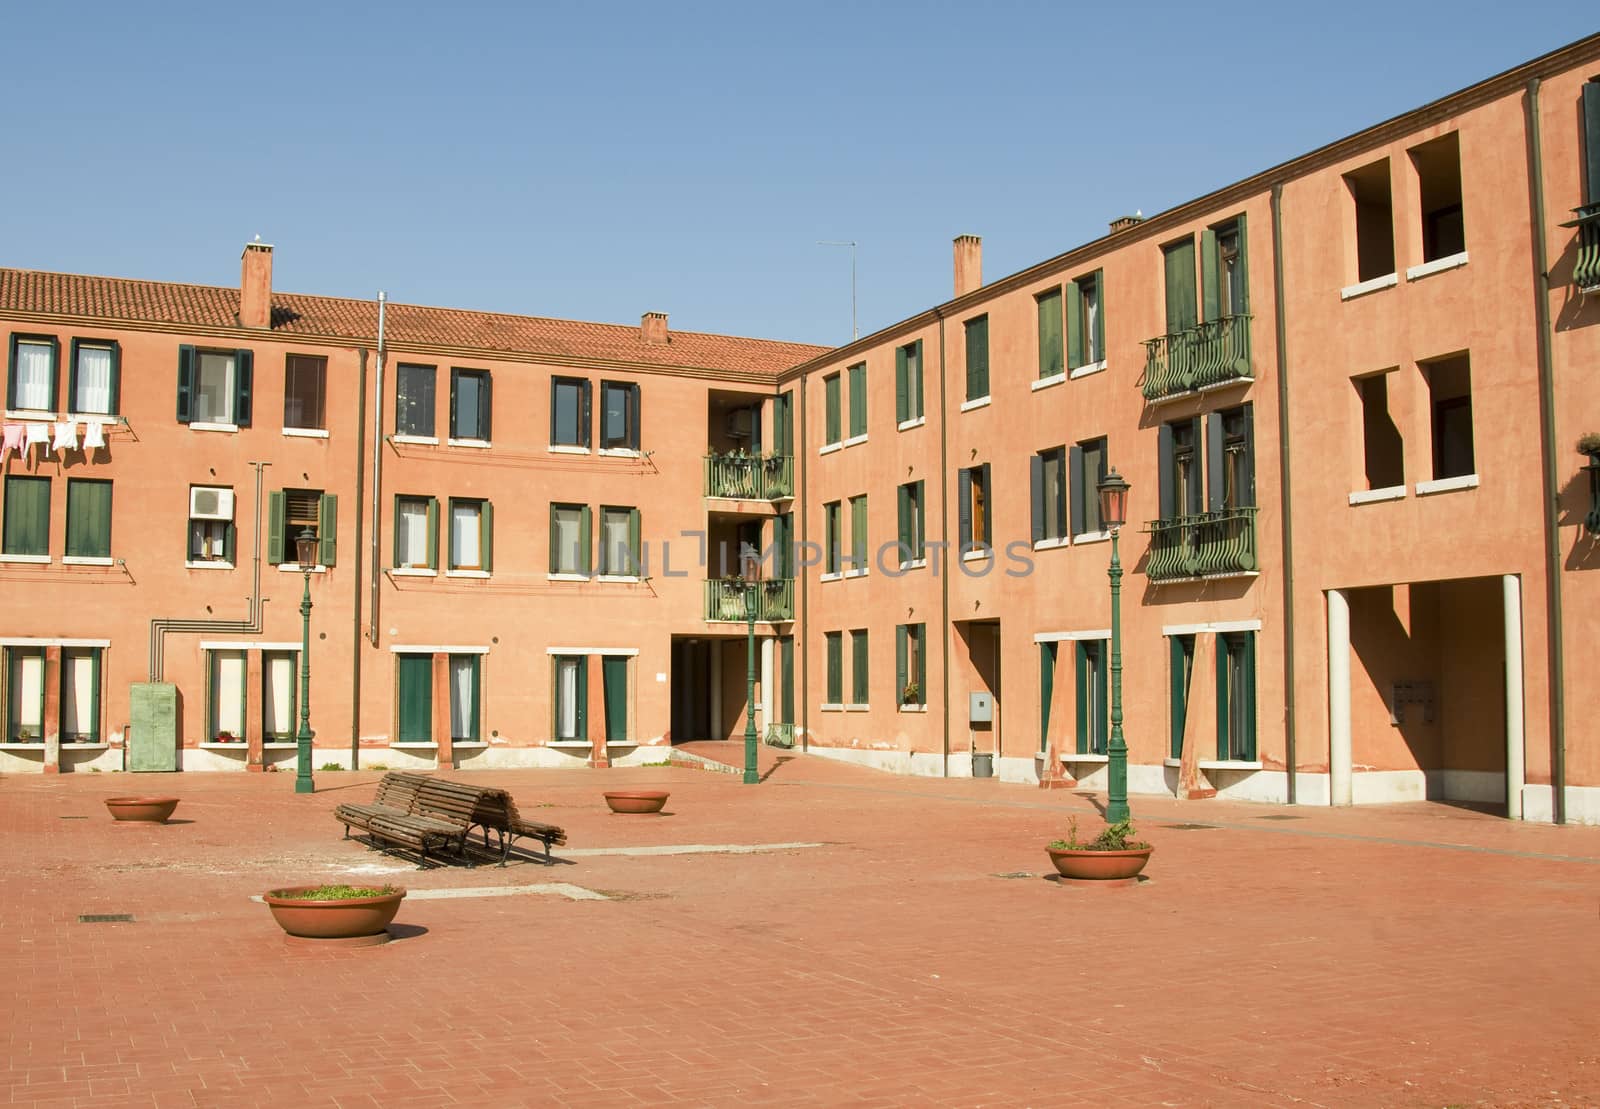 Buildings on the Murano island in Italy